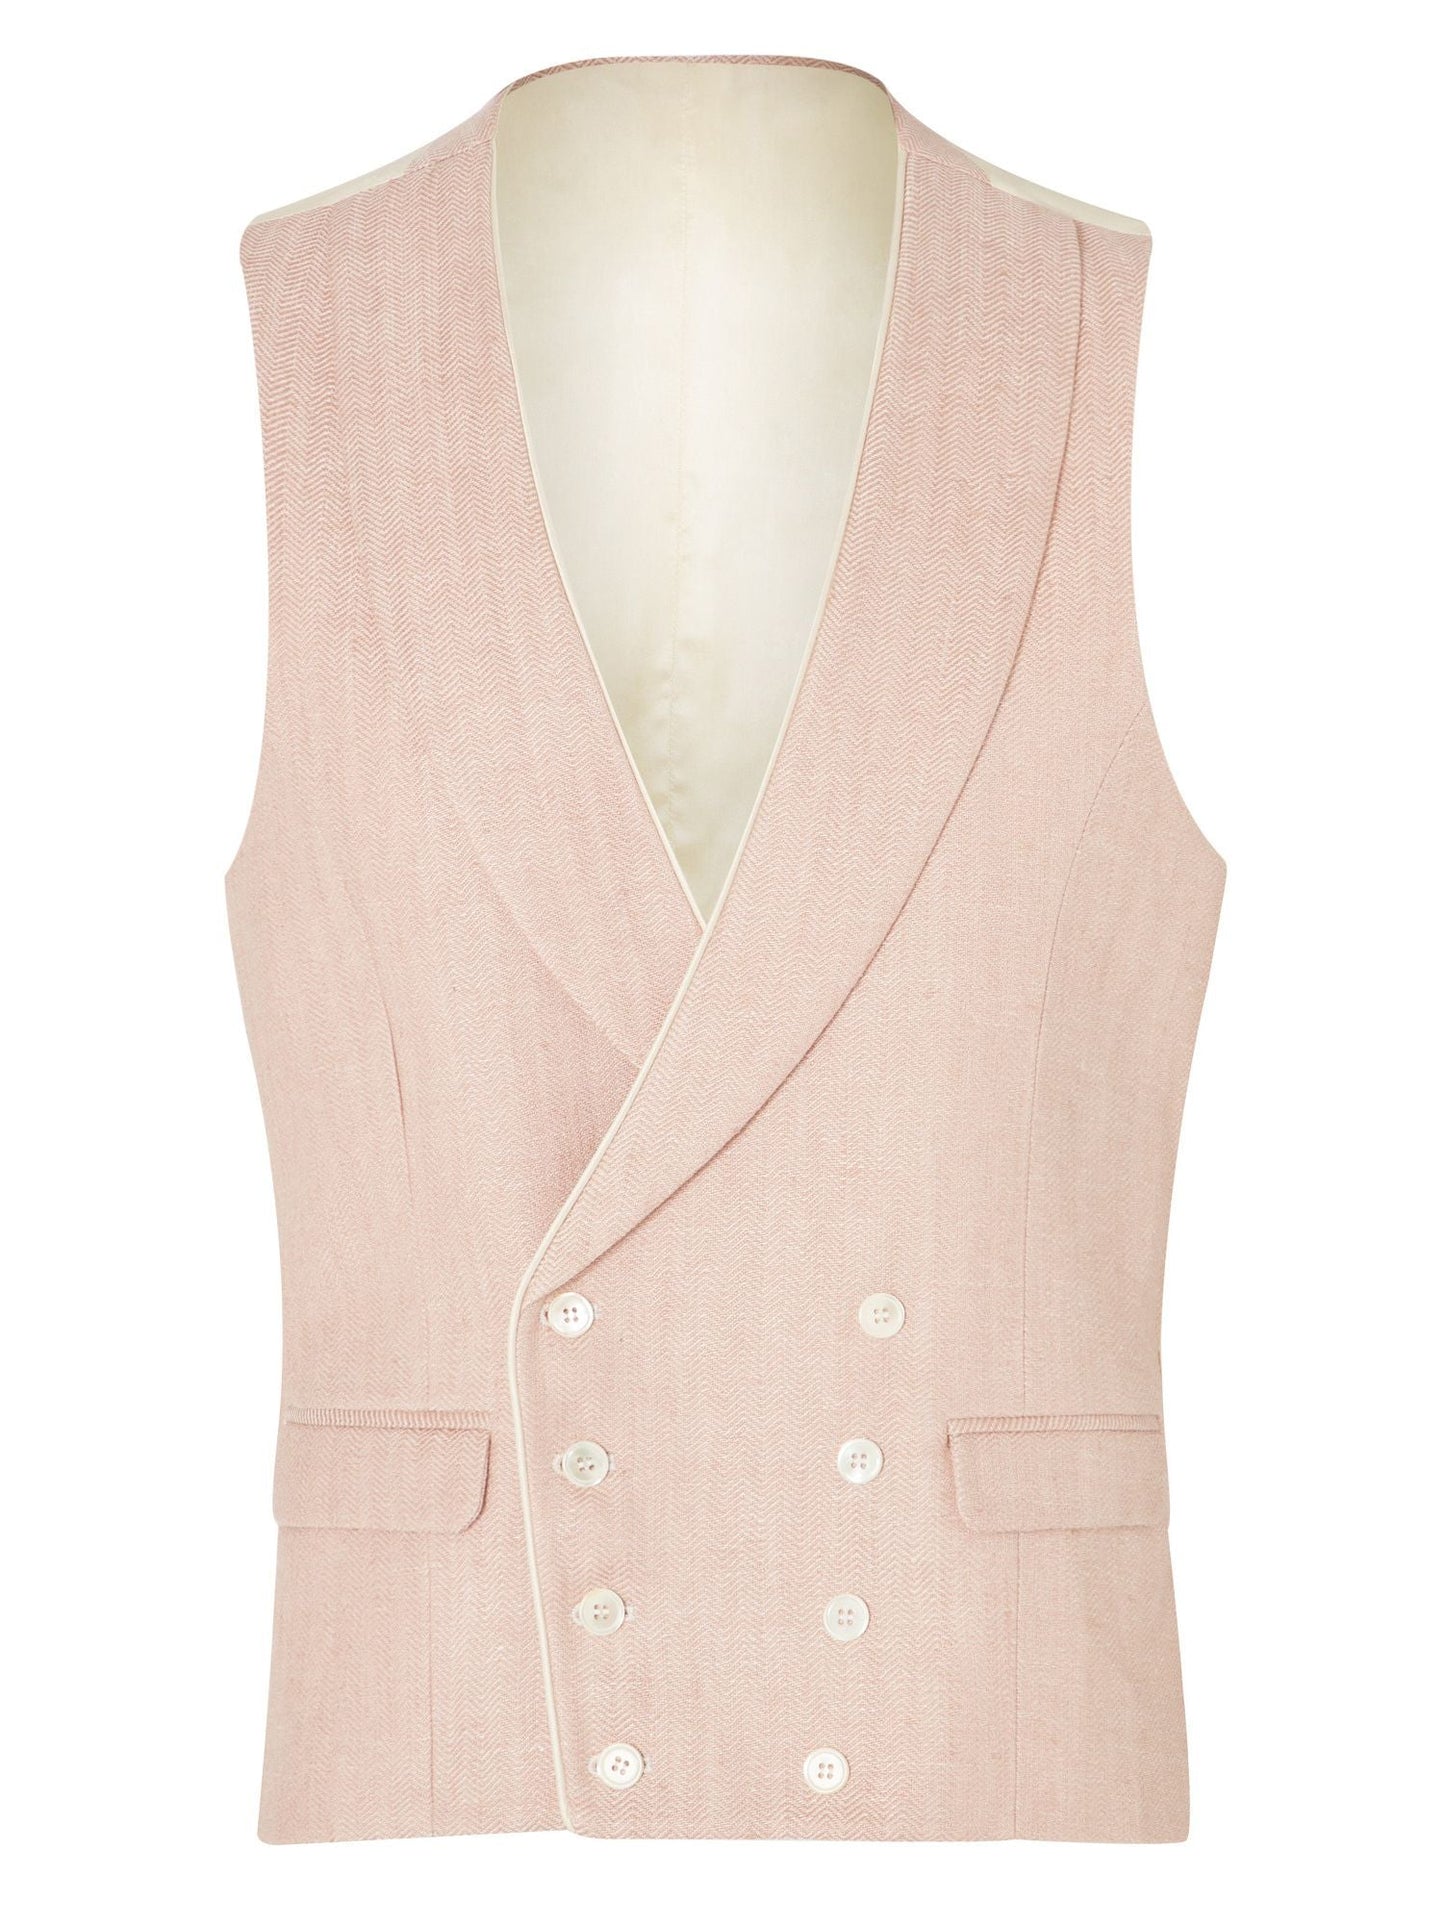 Double Breasted Waistcoat With Piping - Pale Pink Herringbone